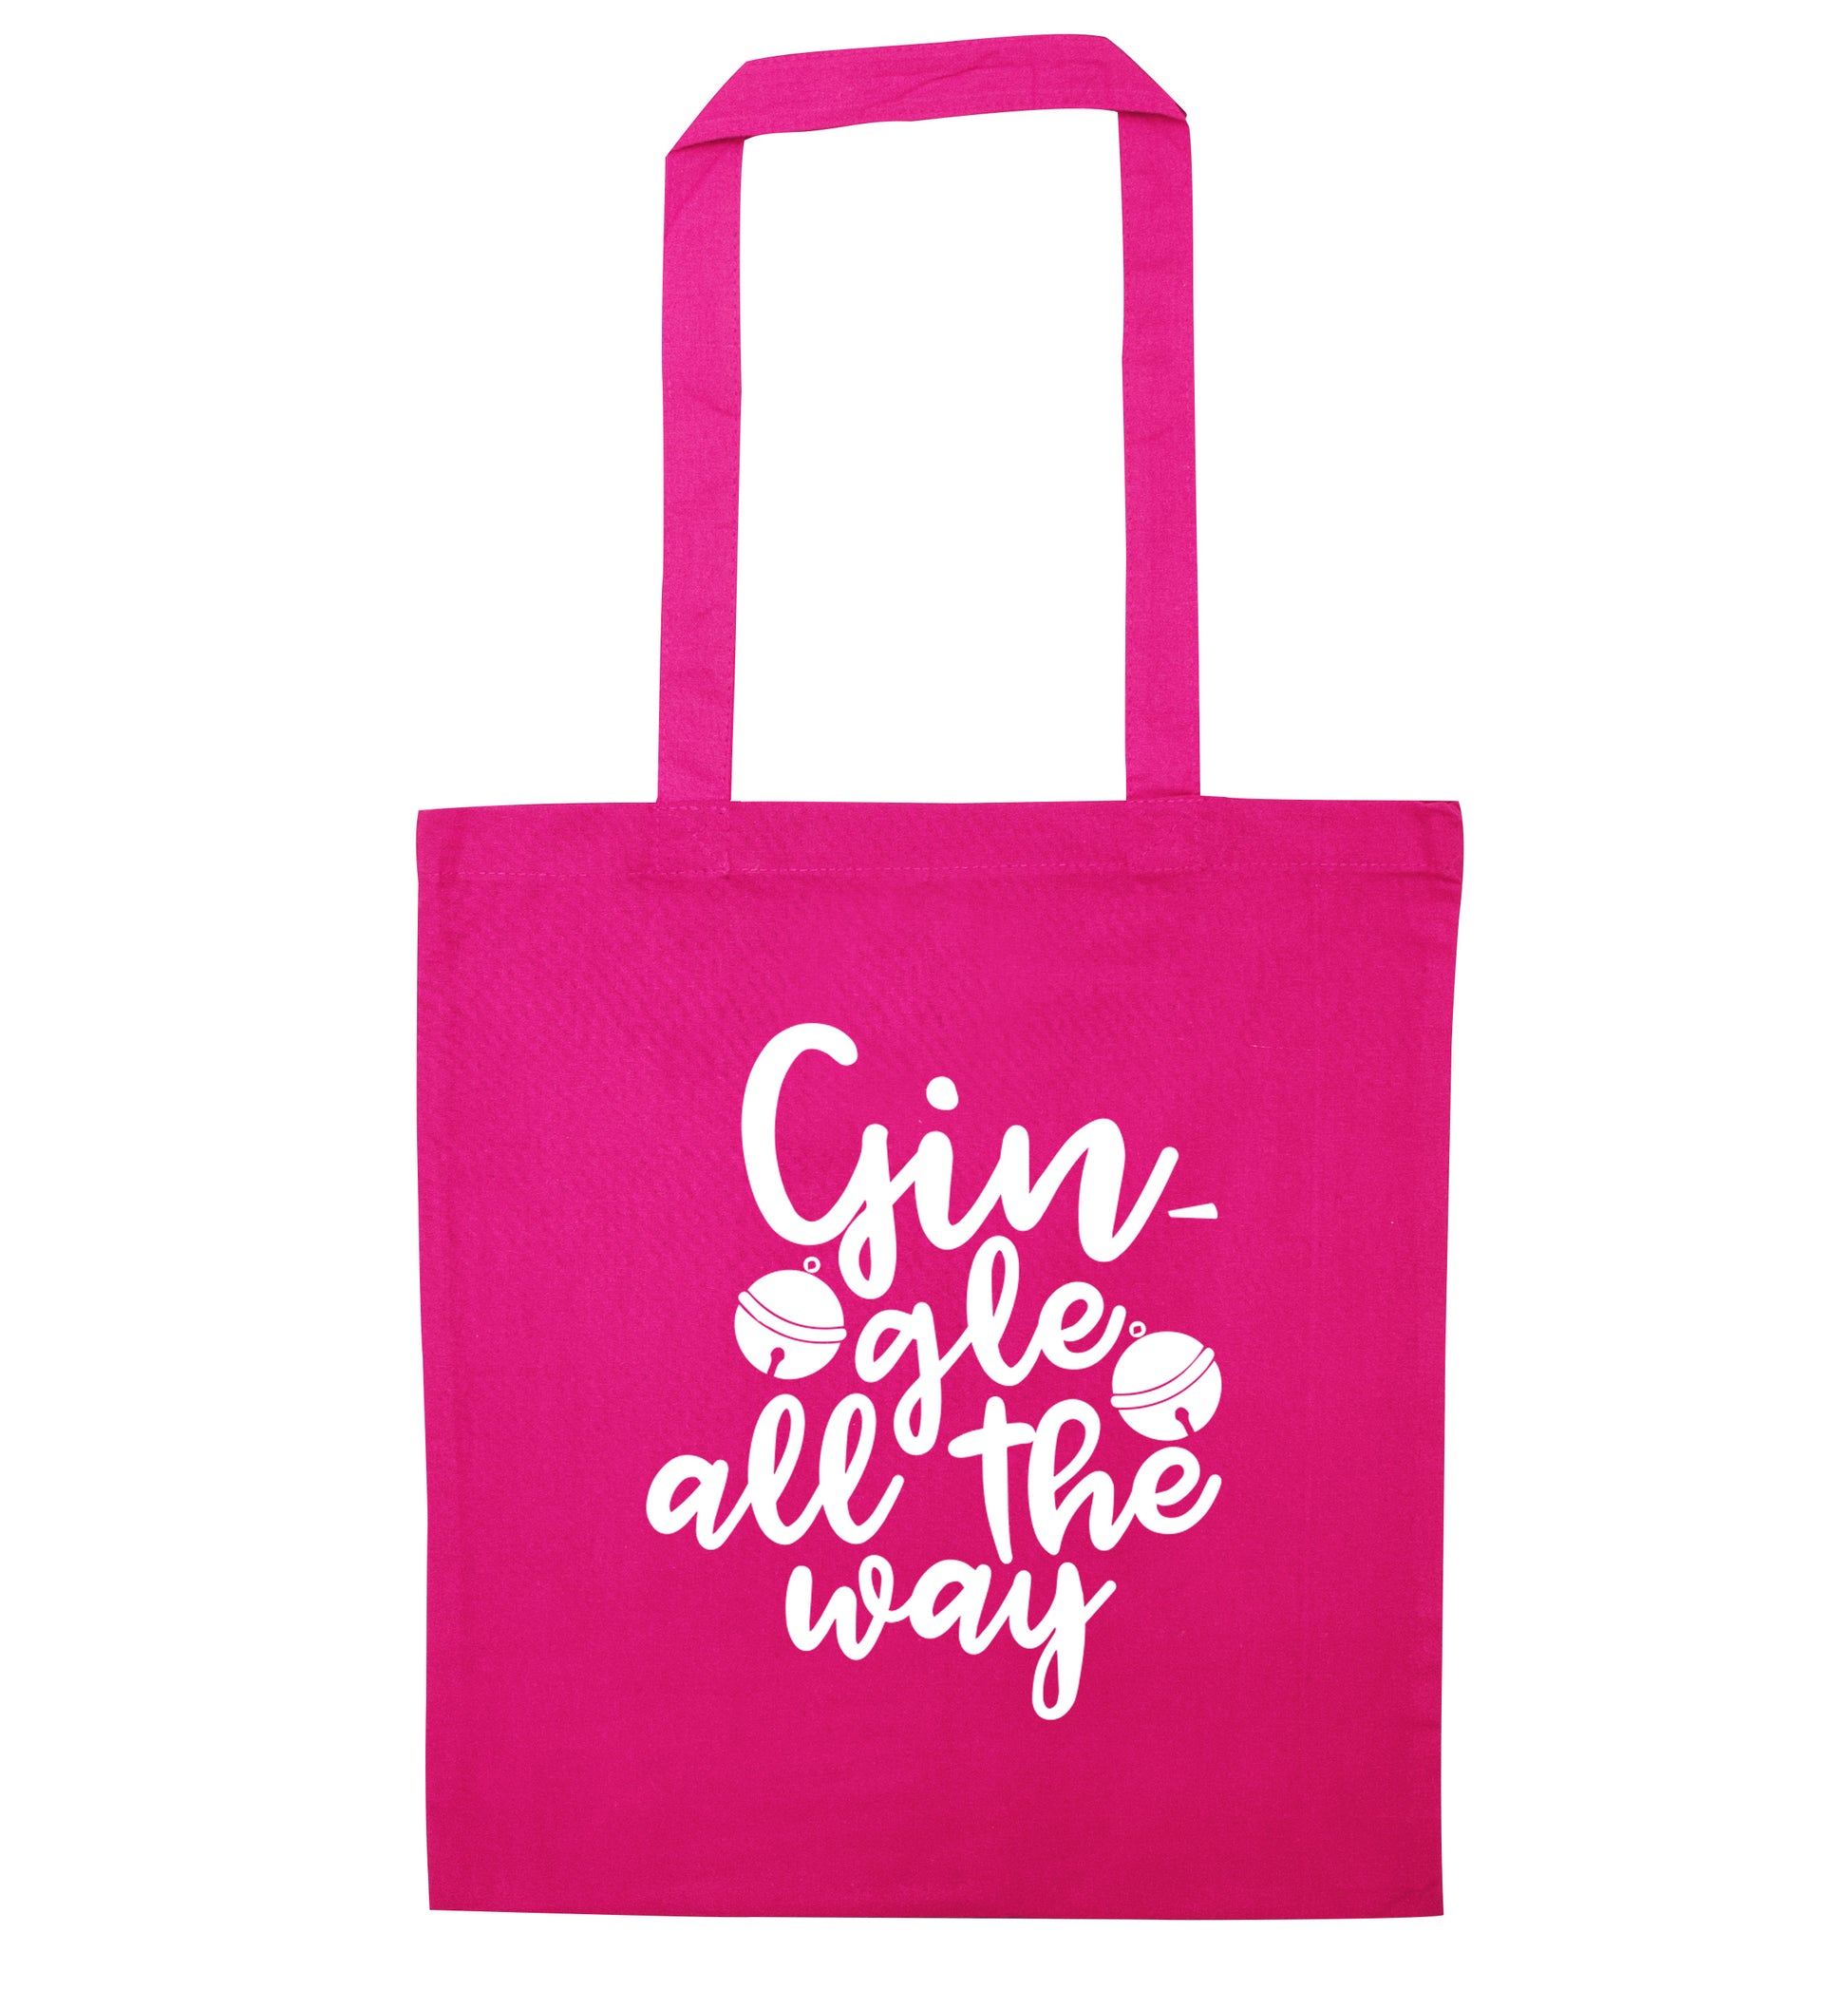 Gin-gle all the way pink tote bag